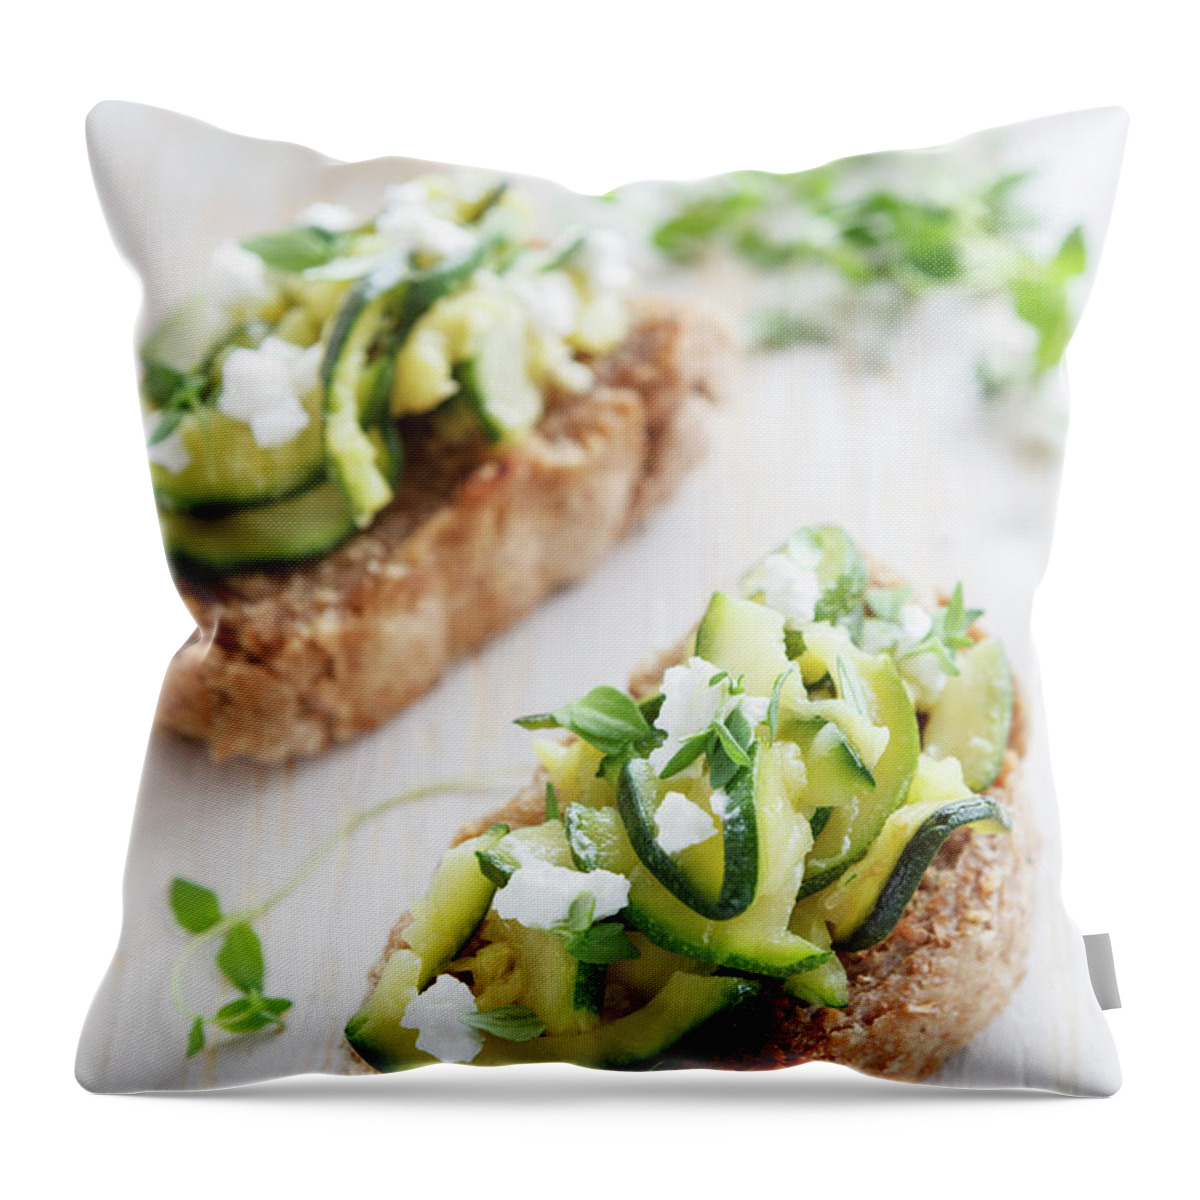 Feta Cheese Throw Pillow featuring the photograph Zucchini, Bruschetta, Thyme And Cheese by Westend61